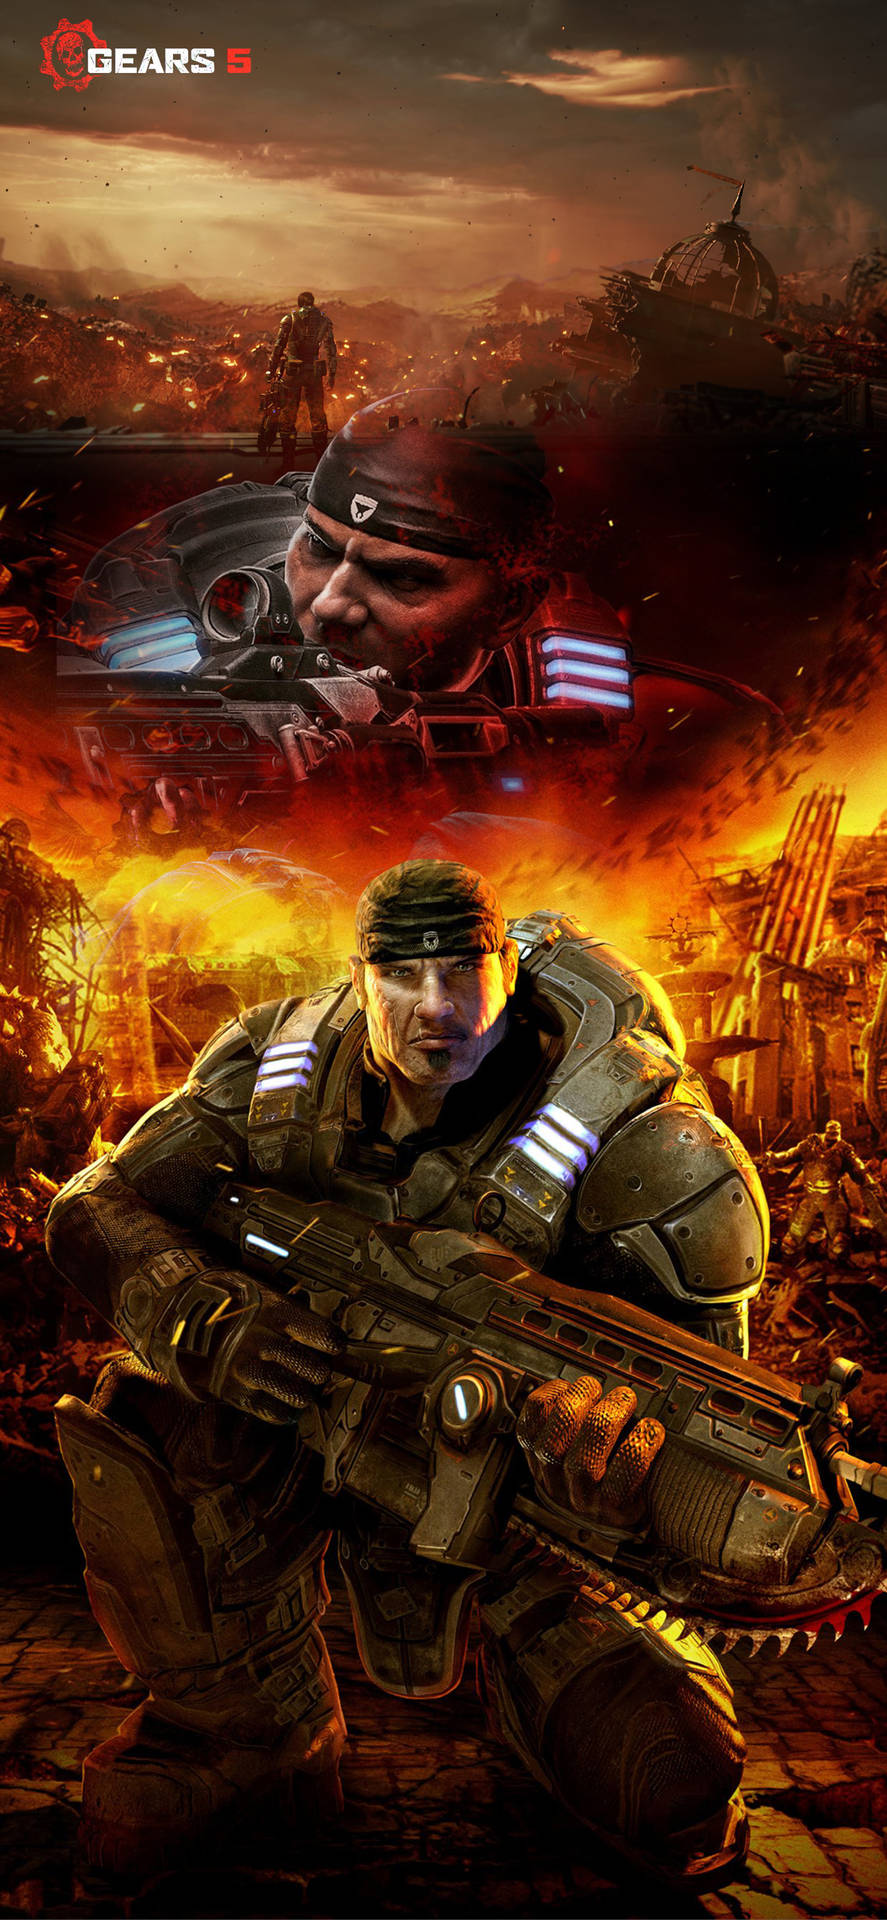 Marcus And Batista Holding Guns Gears 5 Iphone Background